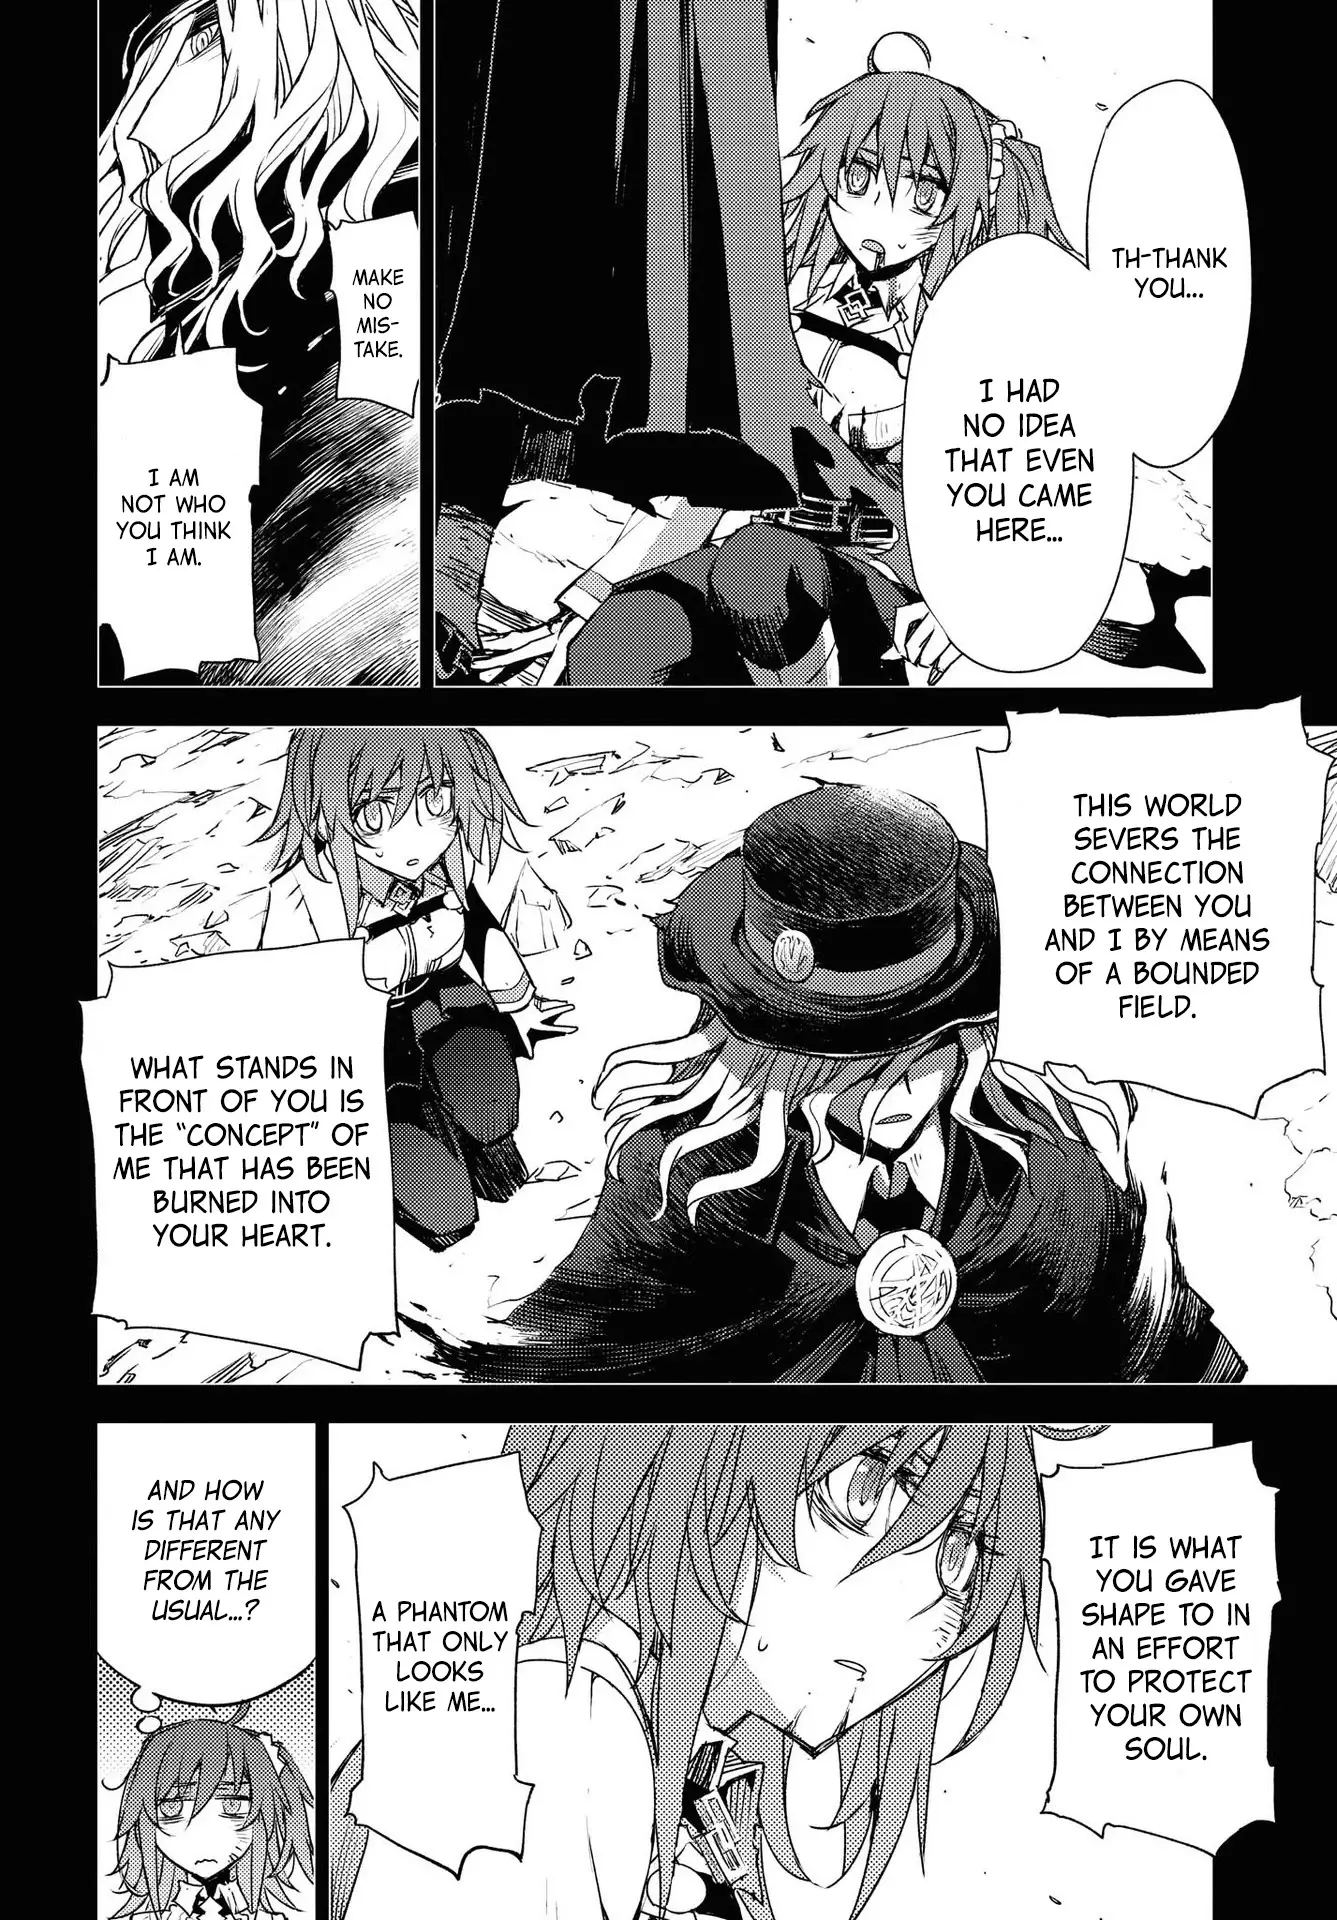 Fate/grand Order: Epic Of Remnant - Subspecies Singularity Iv: Taboo Advent Salem: Salem Of Heresy - 19 page 8